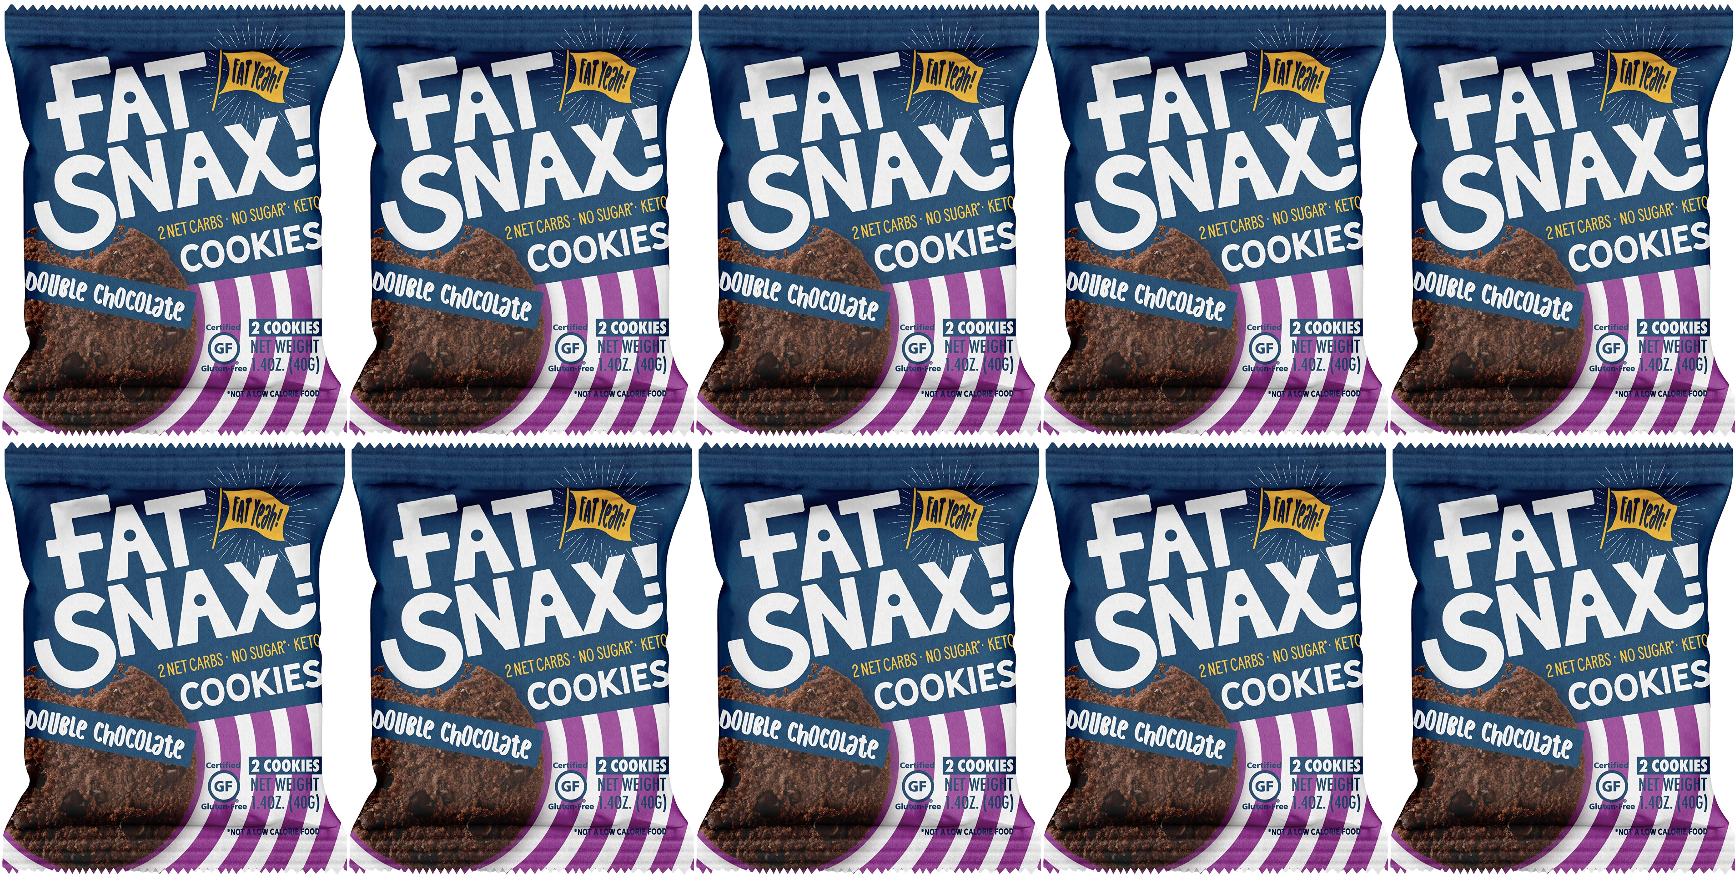 Fat Snax Cookies - Double Chocolate Chip - High-quality Protein Cookies by Fat Snax at 